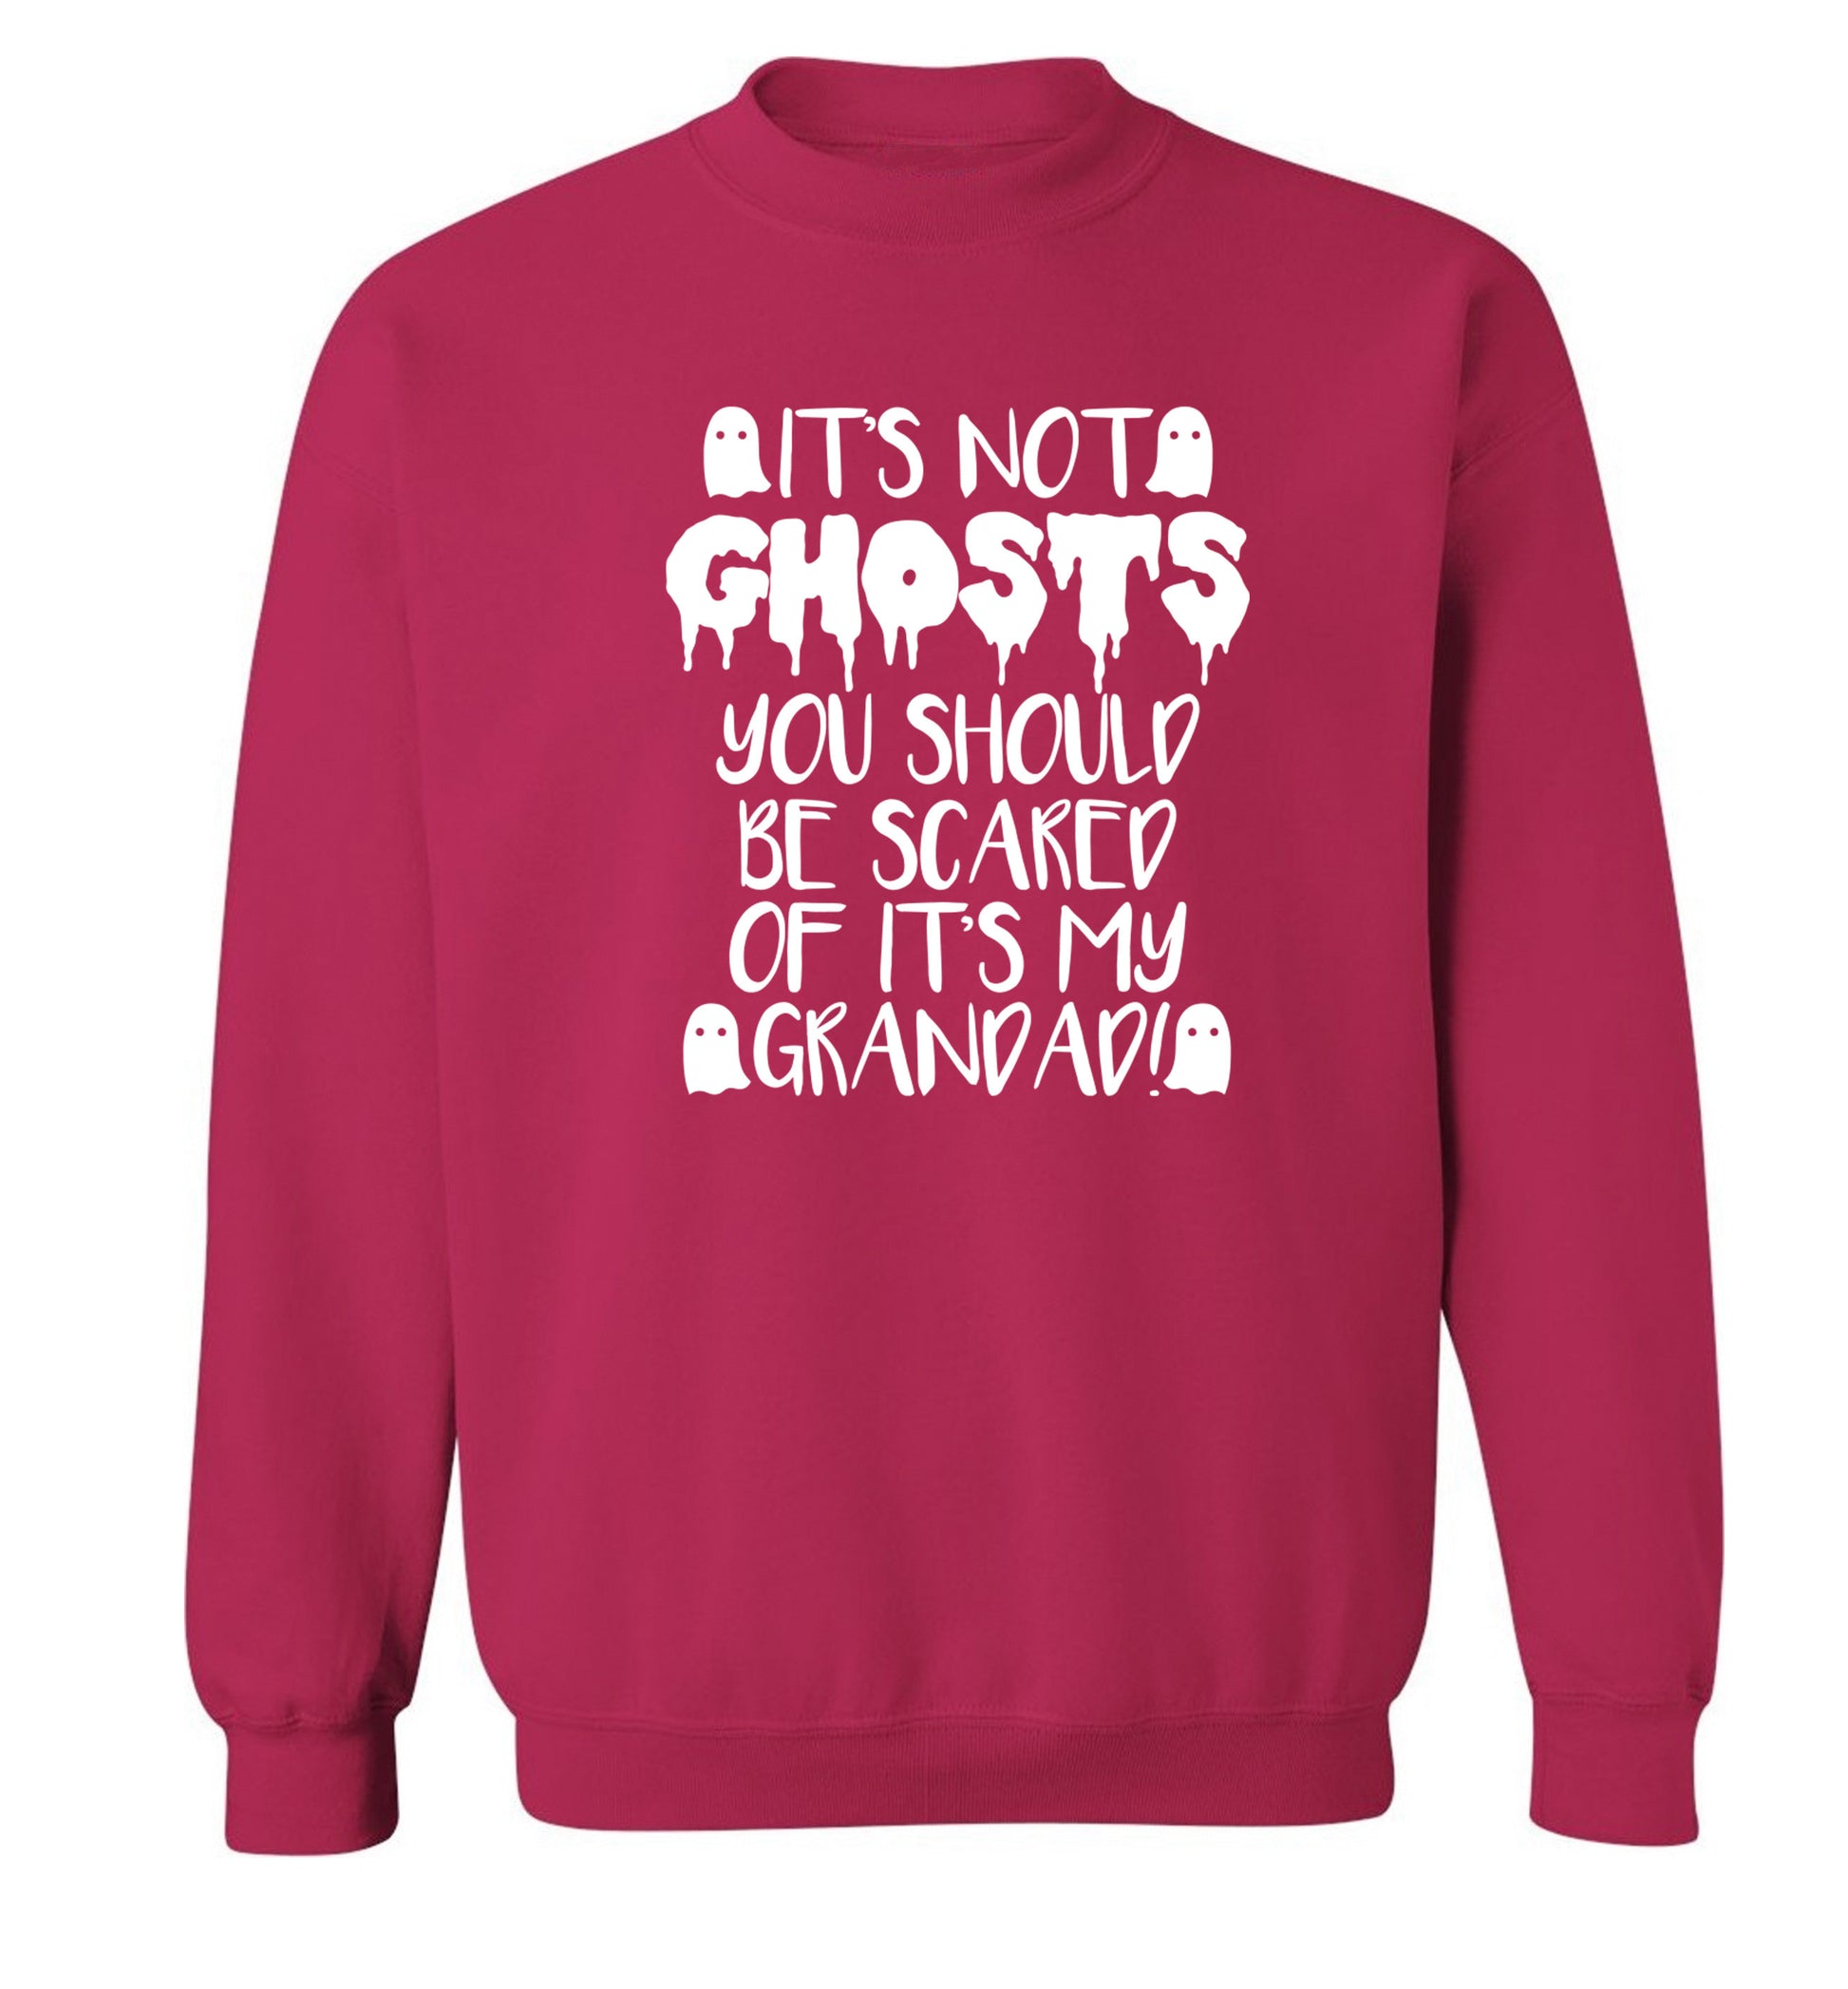 It's not ghosts you should be scared of it's my grandad! Adult's unisex pink Sweater 2XL